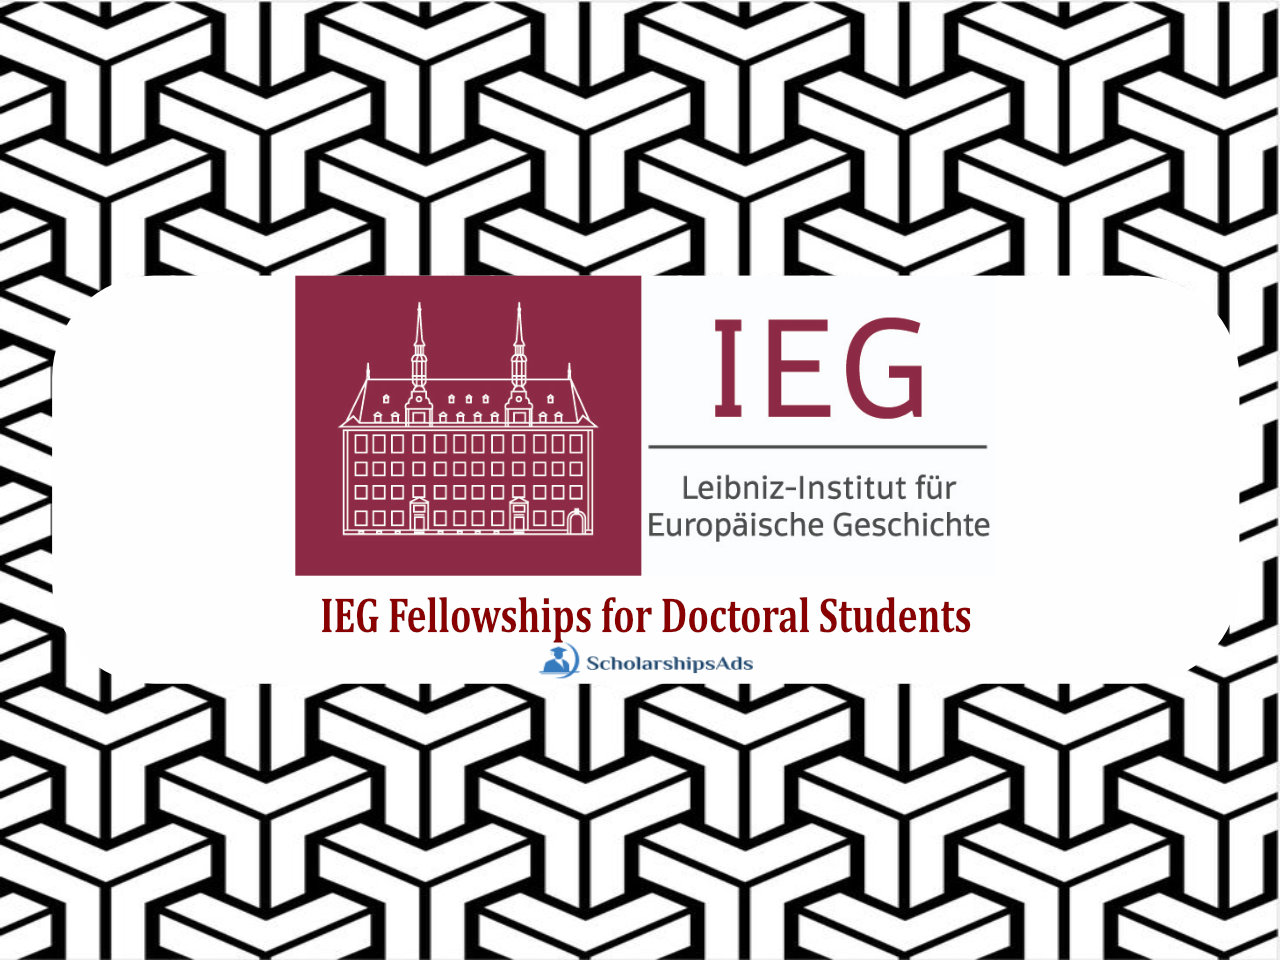 IEG Fellowships for Doctoral Students, Germany 2022